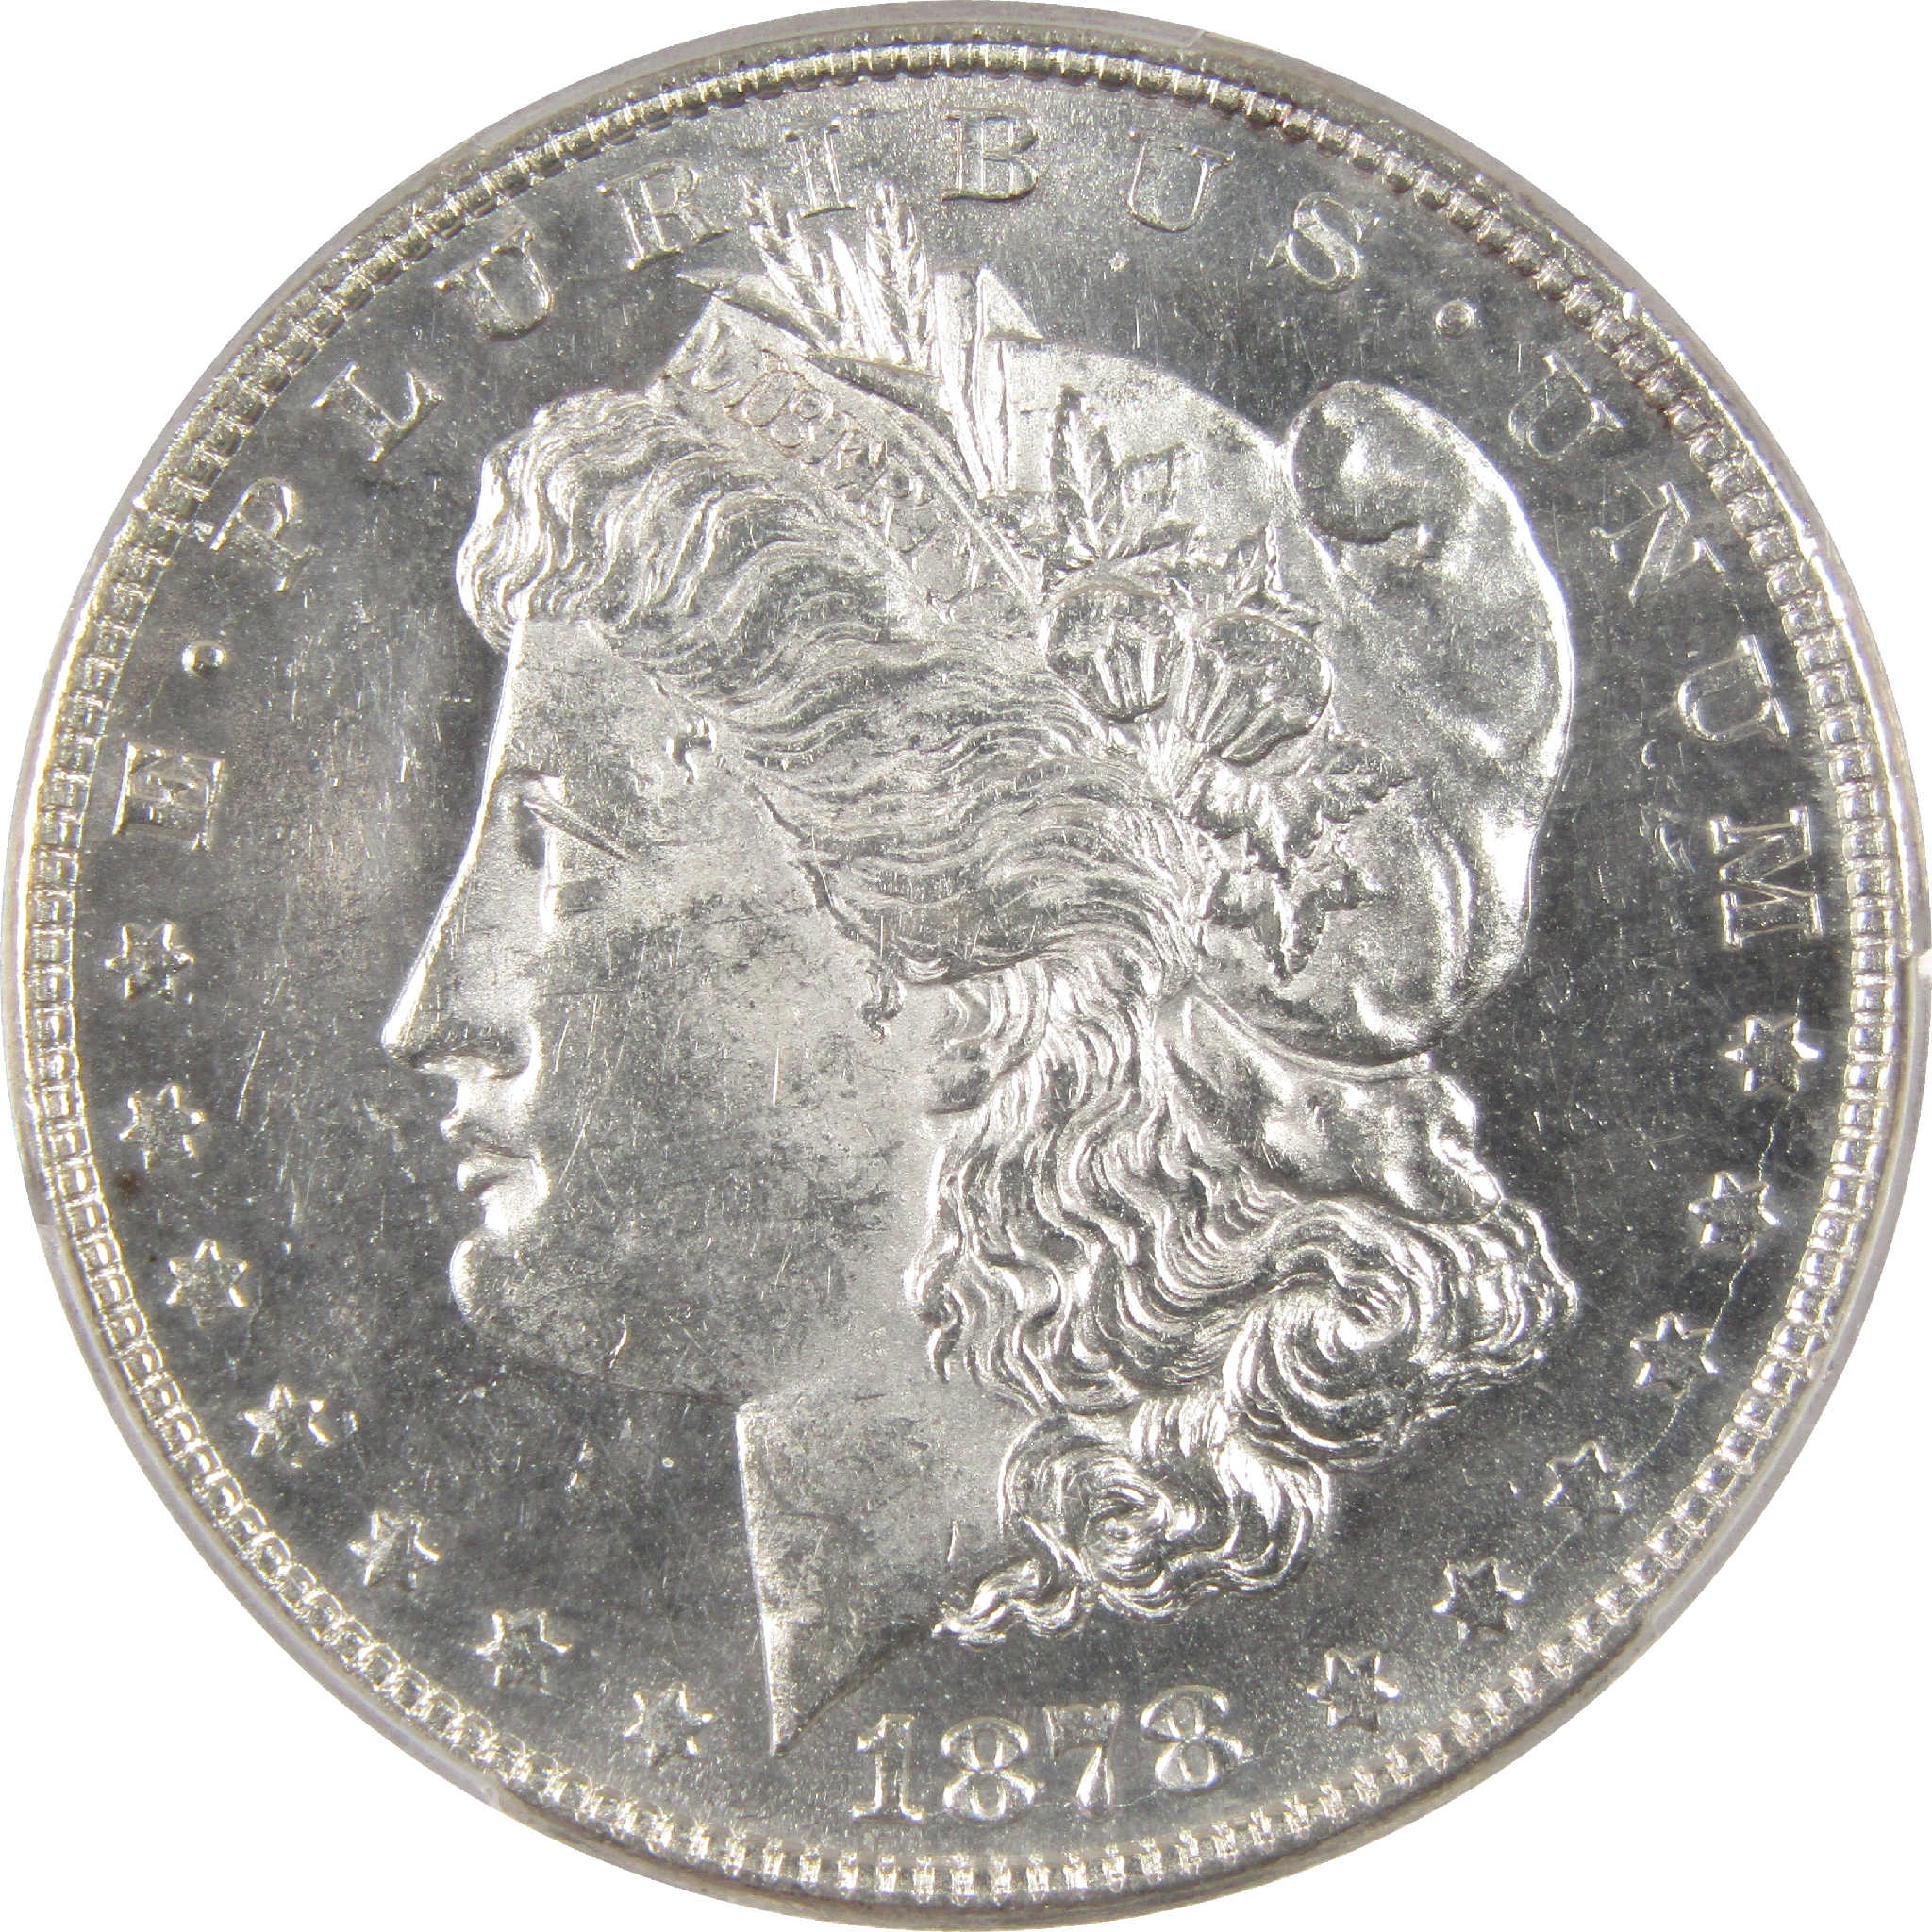 1878 8TF Morgan Dollar MS 62 PCGS Silver $1 Uncirculated SKU:I11340 - Morgan coin - Morgan silver dollar - Morgan silver dollar for sale - Profile Coins &amp; Collectibles